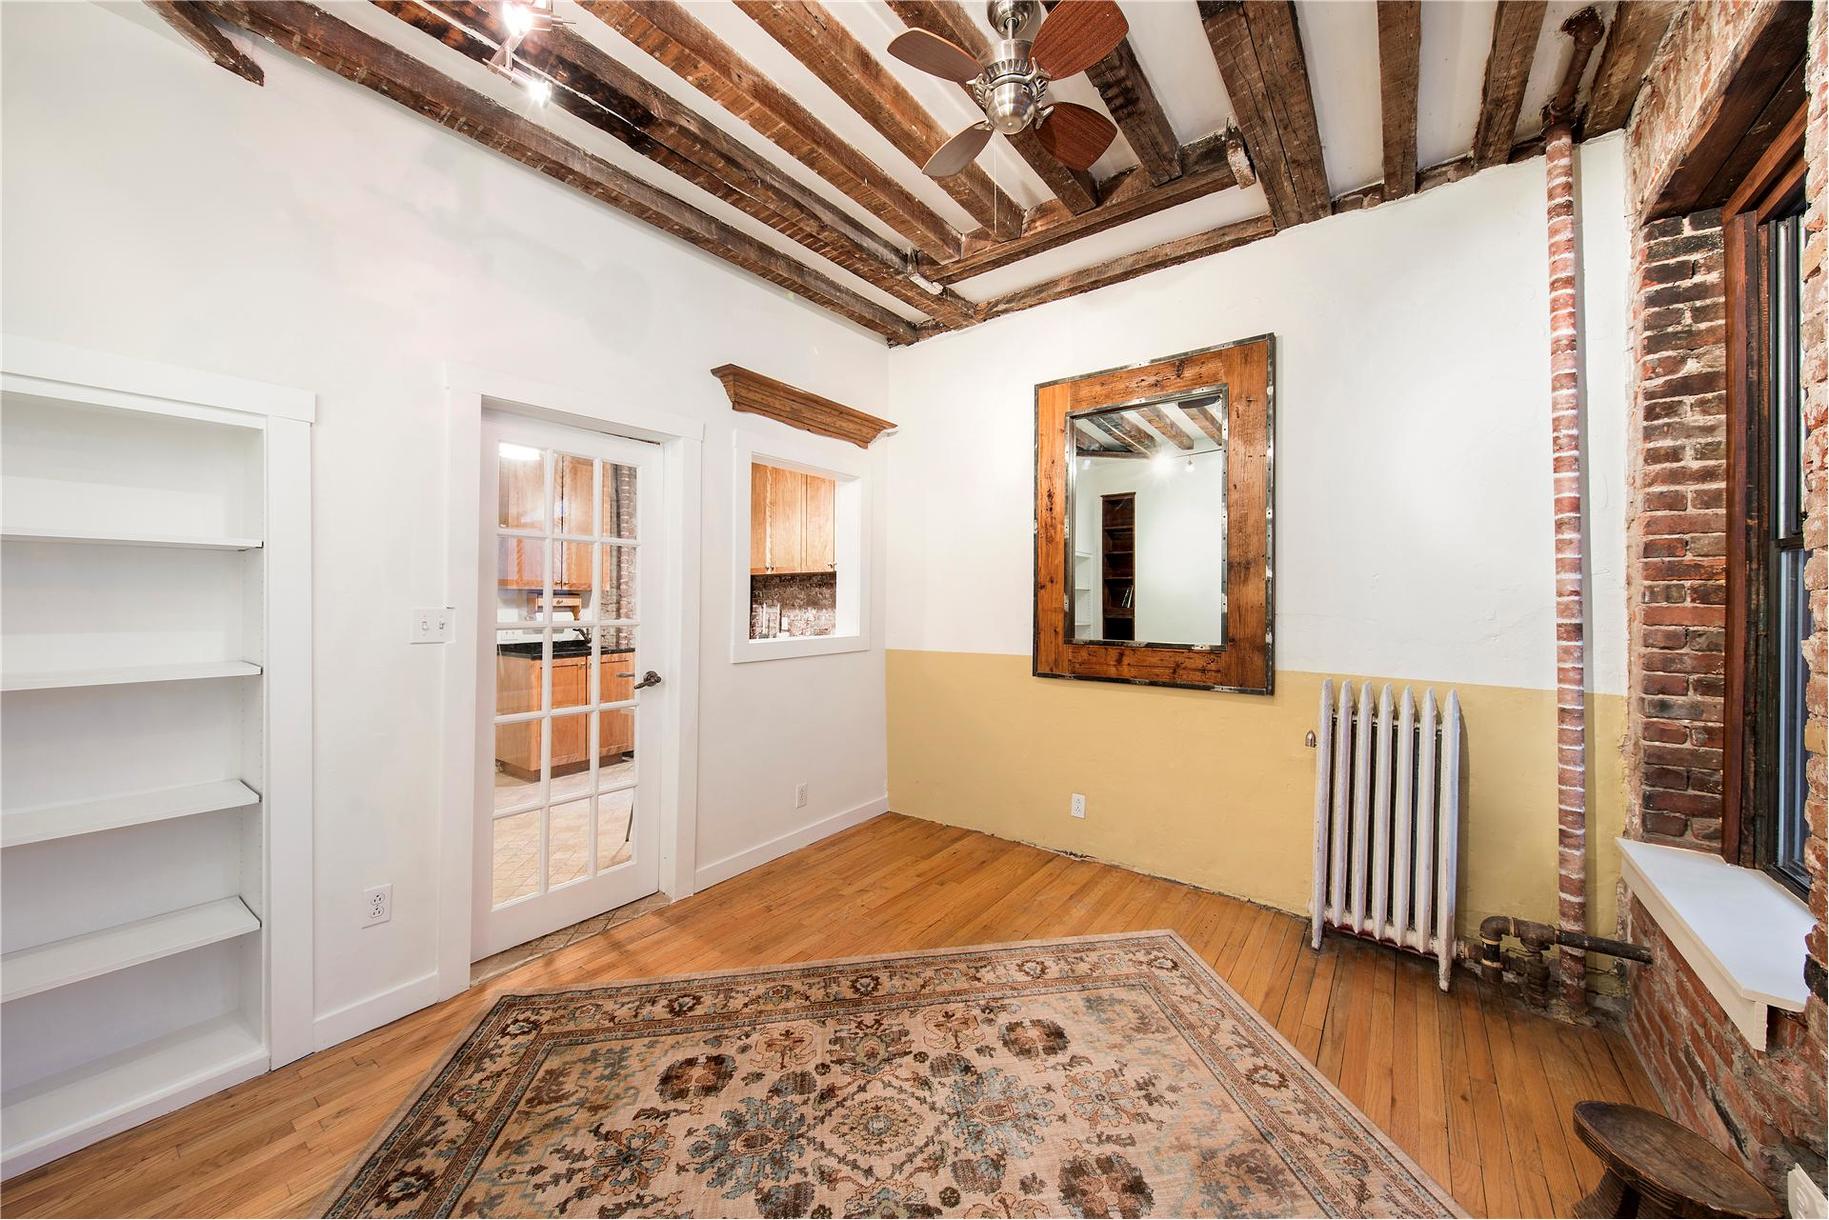 228 East 13th Street, East Village, Studio, Low Six Figures, East Village apartment for sale, co-ops, quirky home, sunroom